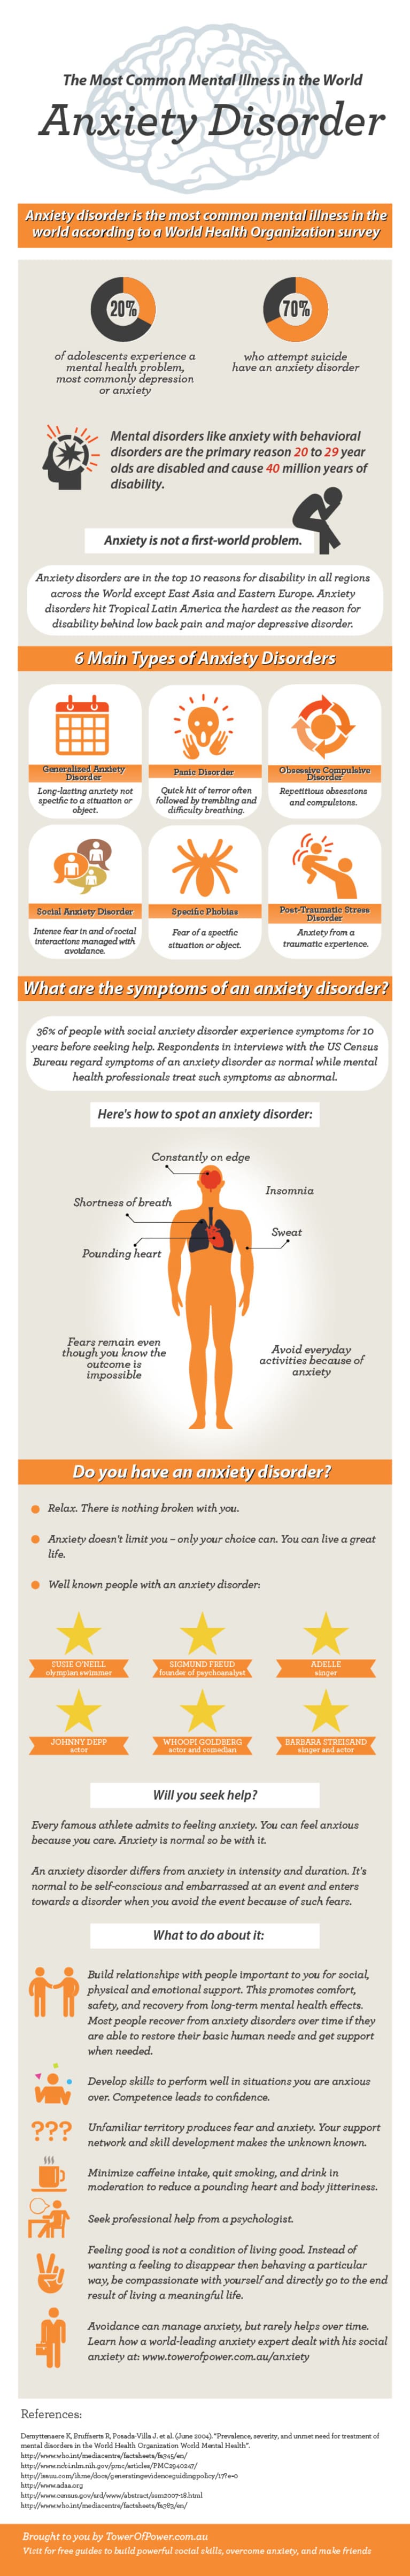 What You Should Know About Anxiety Disorders (Infographic)